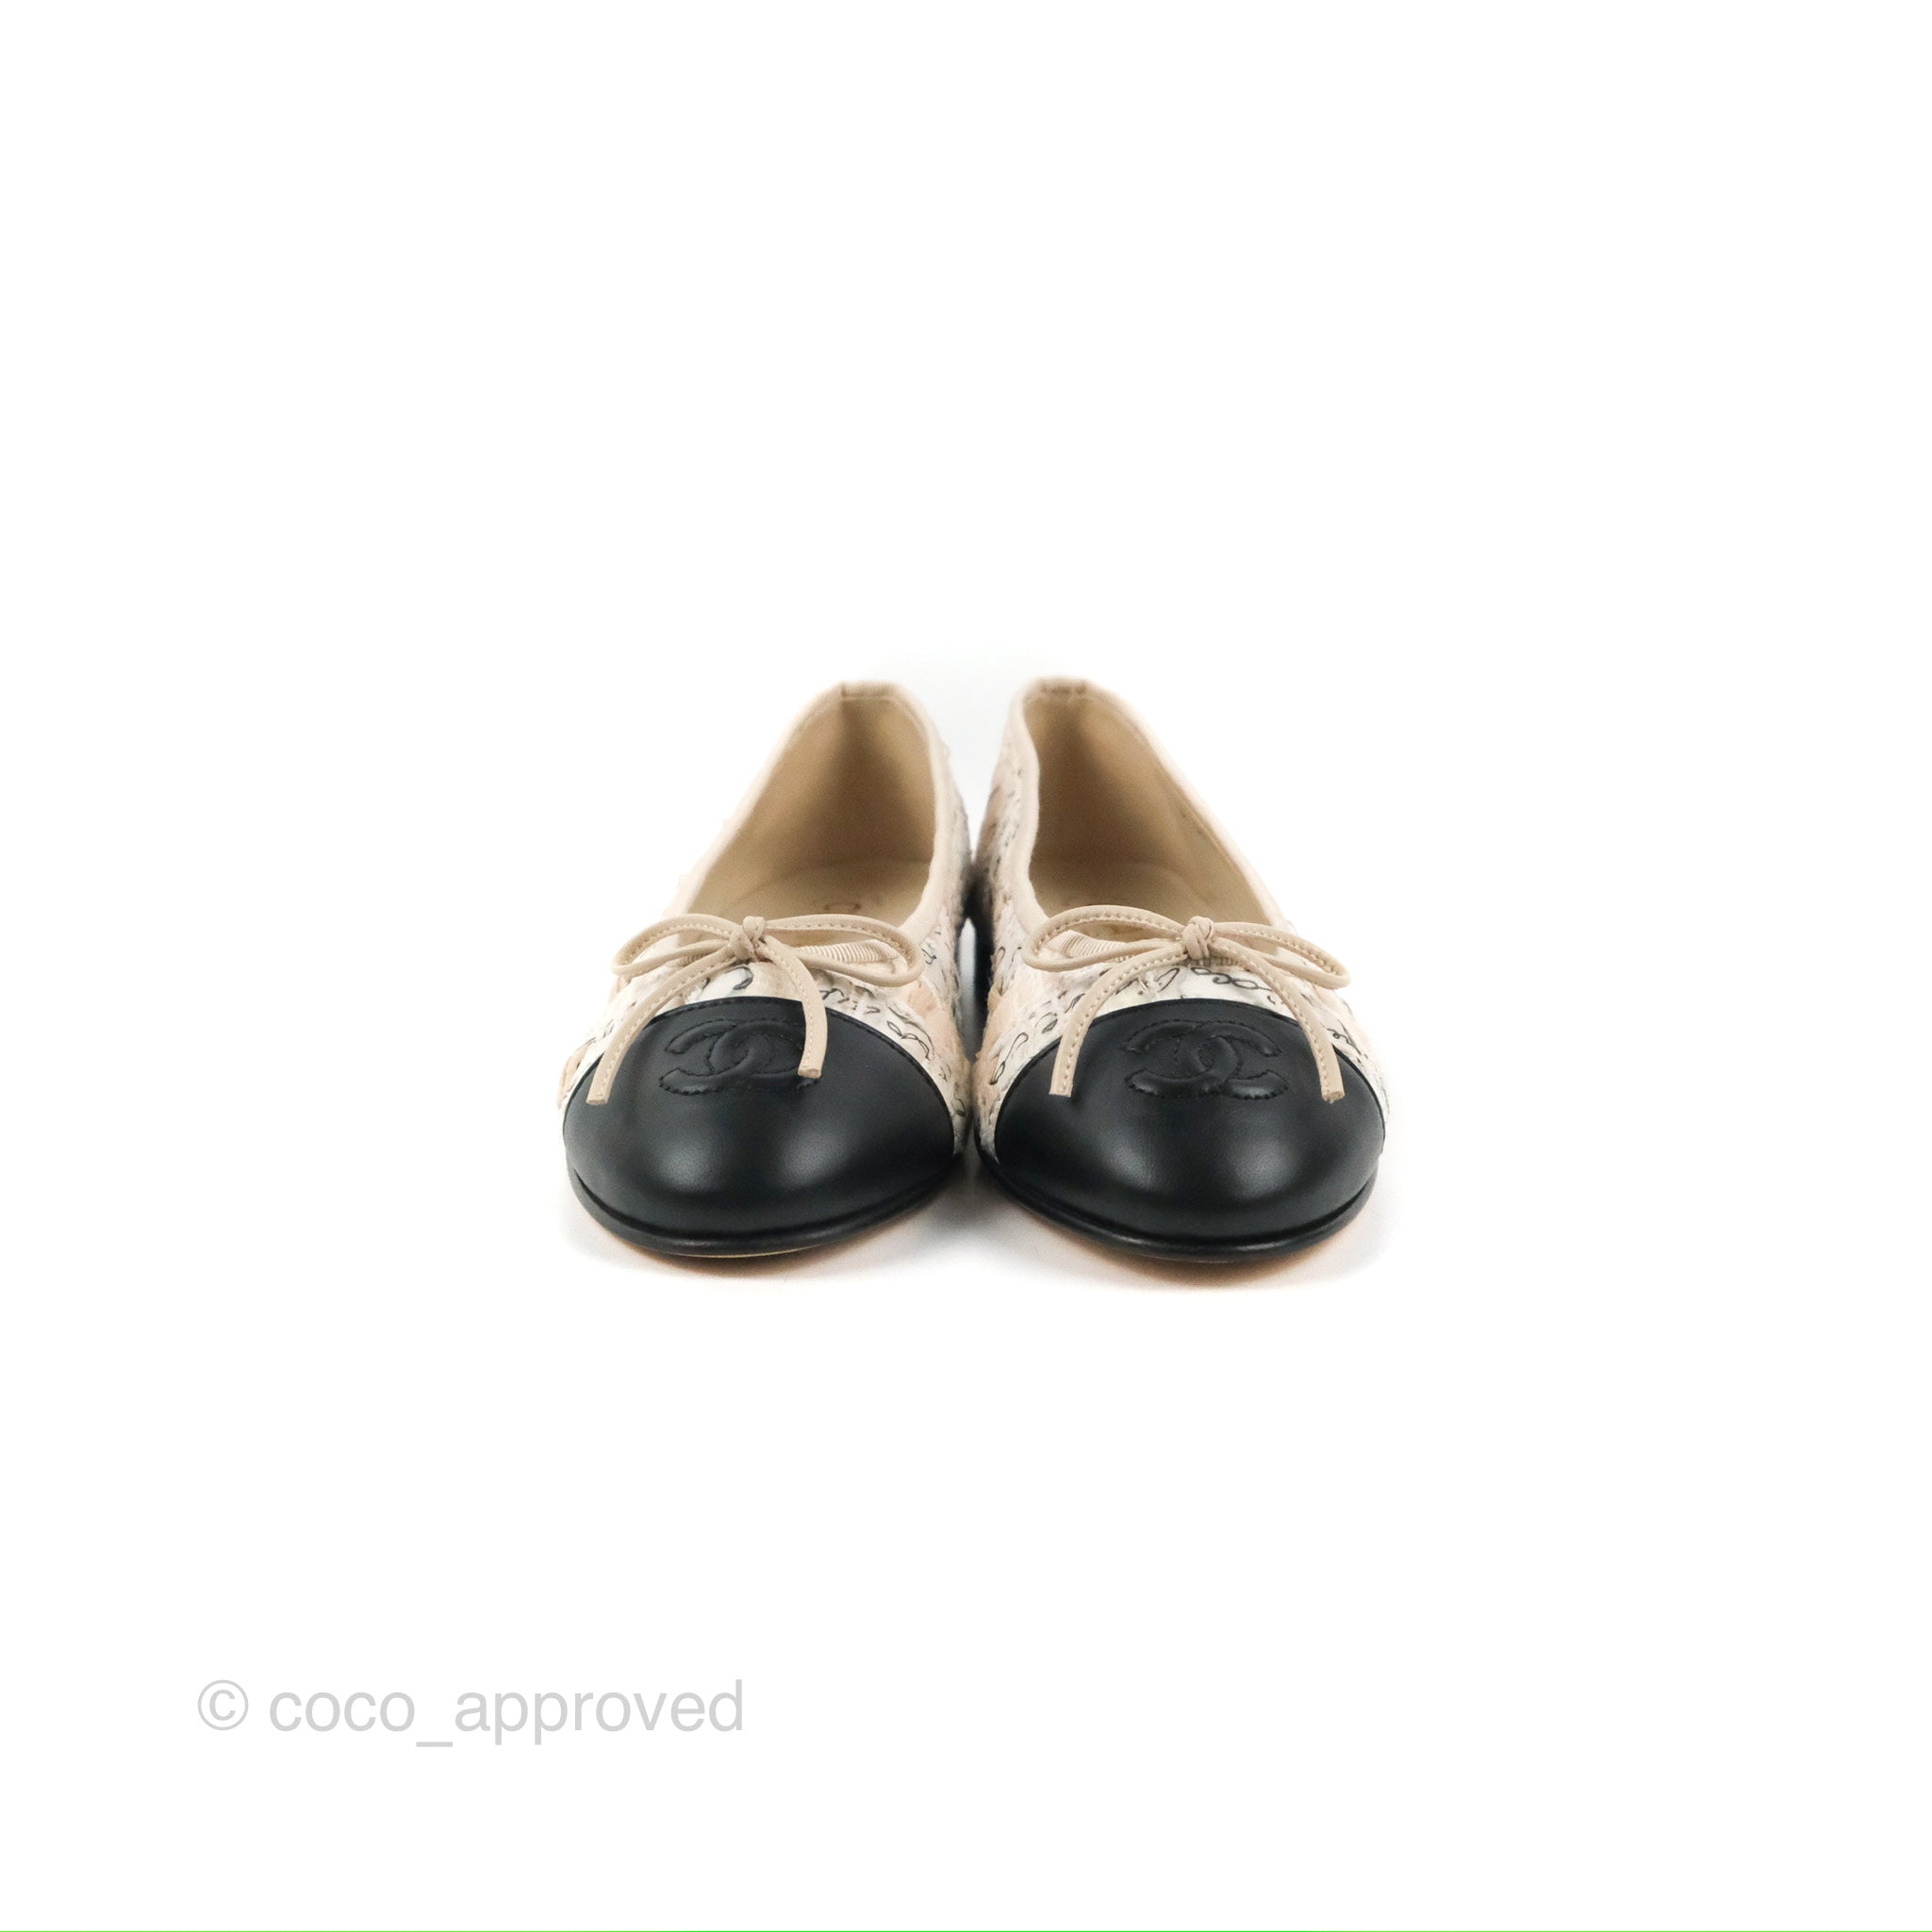 Chanel Quilted Ballerina Flats in Black Size 38.5 | MTYCI